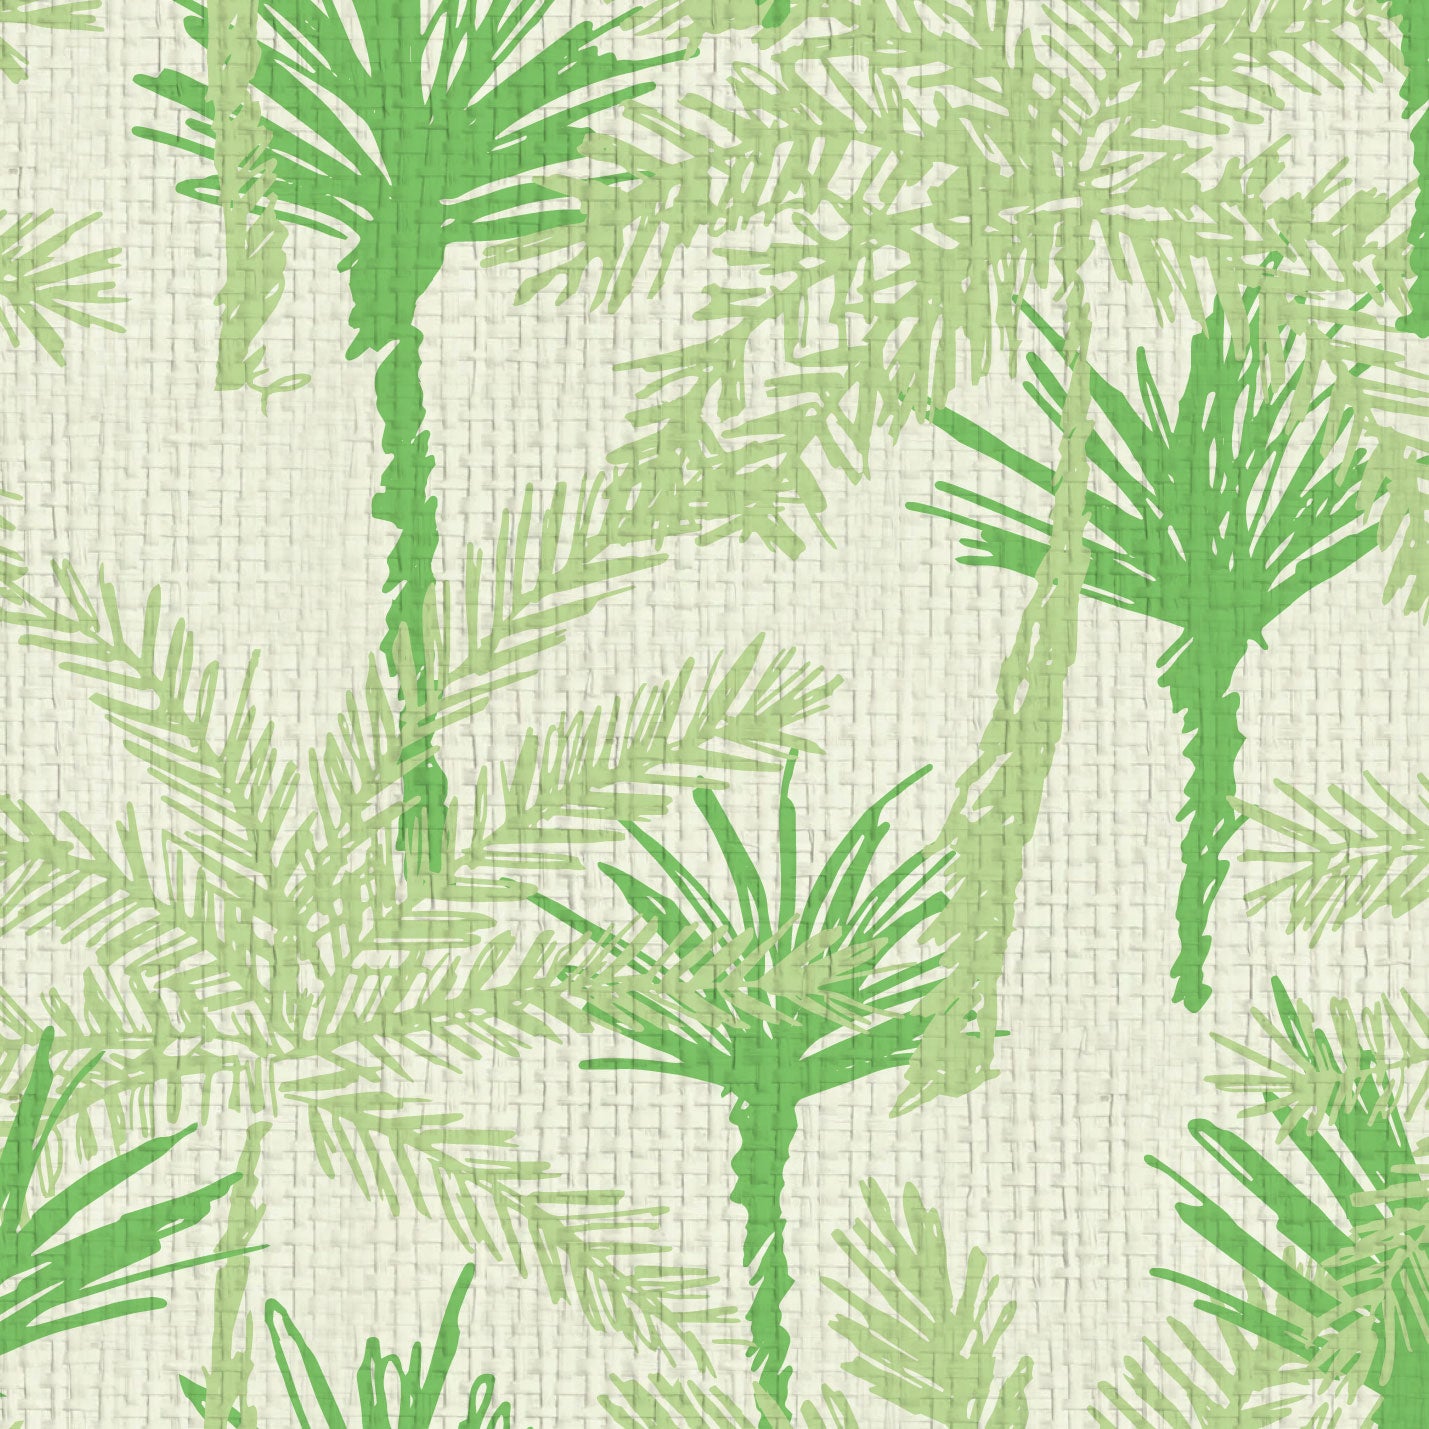 wallpaper Natural Textured Eco-Friendly Non-toxic High-quality Sustainable Interior Design Bold Custom Tailor-made Retro chic Tropical Jungle Coastal Garden Seaside Coastal Seashore Waterfront Vacation home styling Retreat Relaxed beach vibes Beach cottage Shoreline Oceanfront nature palm tree palms tonal cream off-white beige green jungle mint sage paperweave paper weave